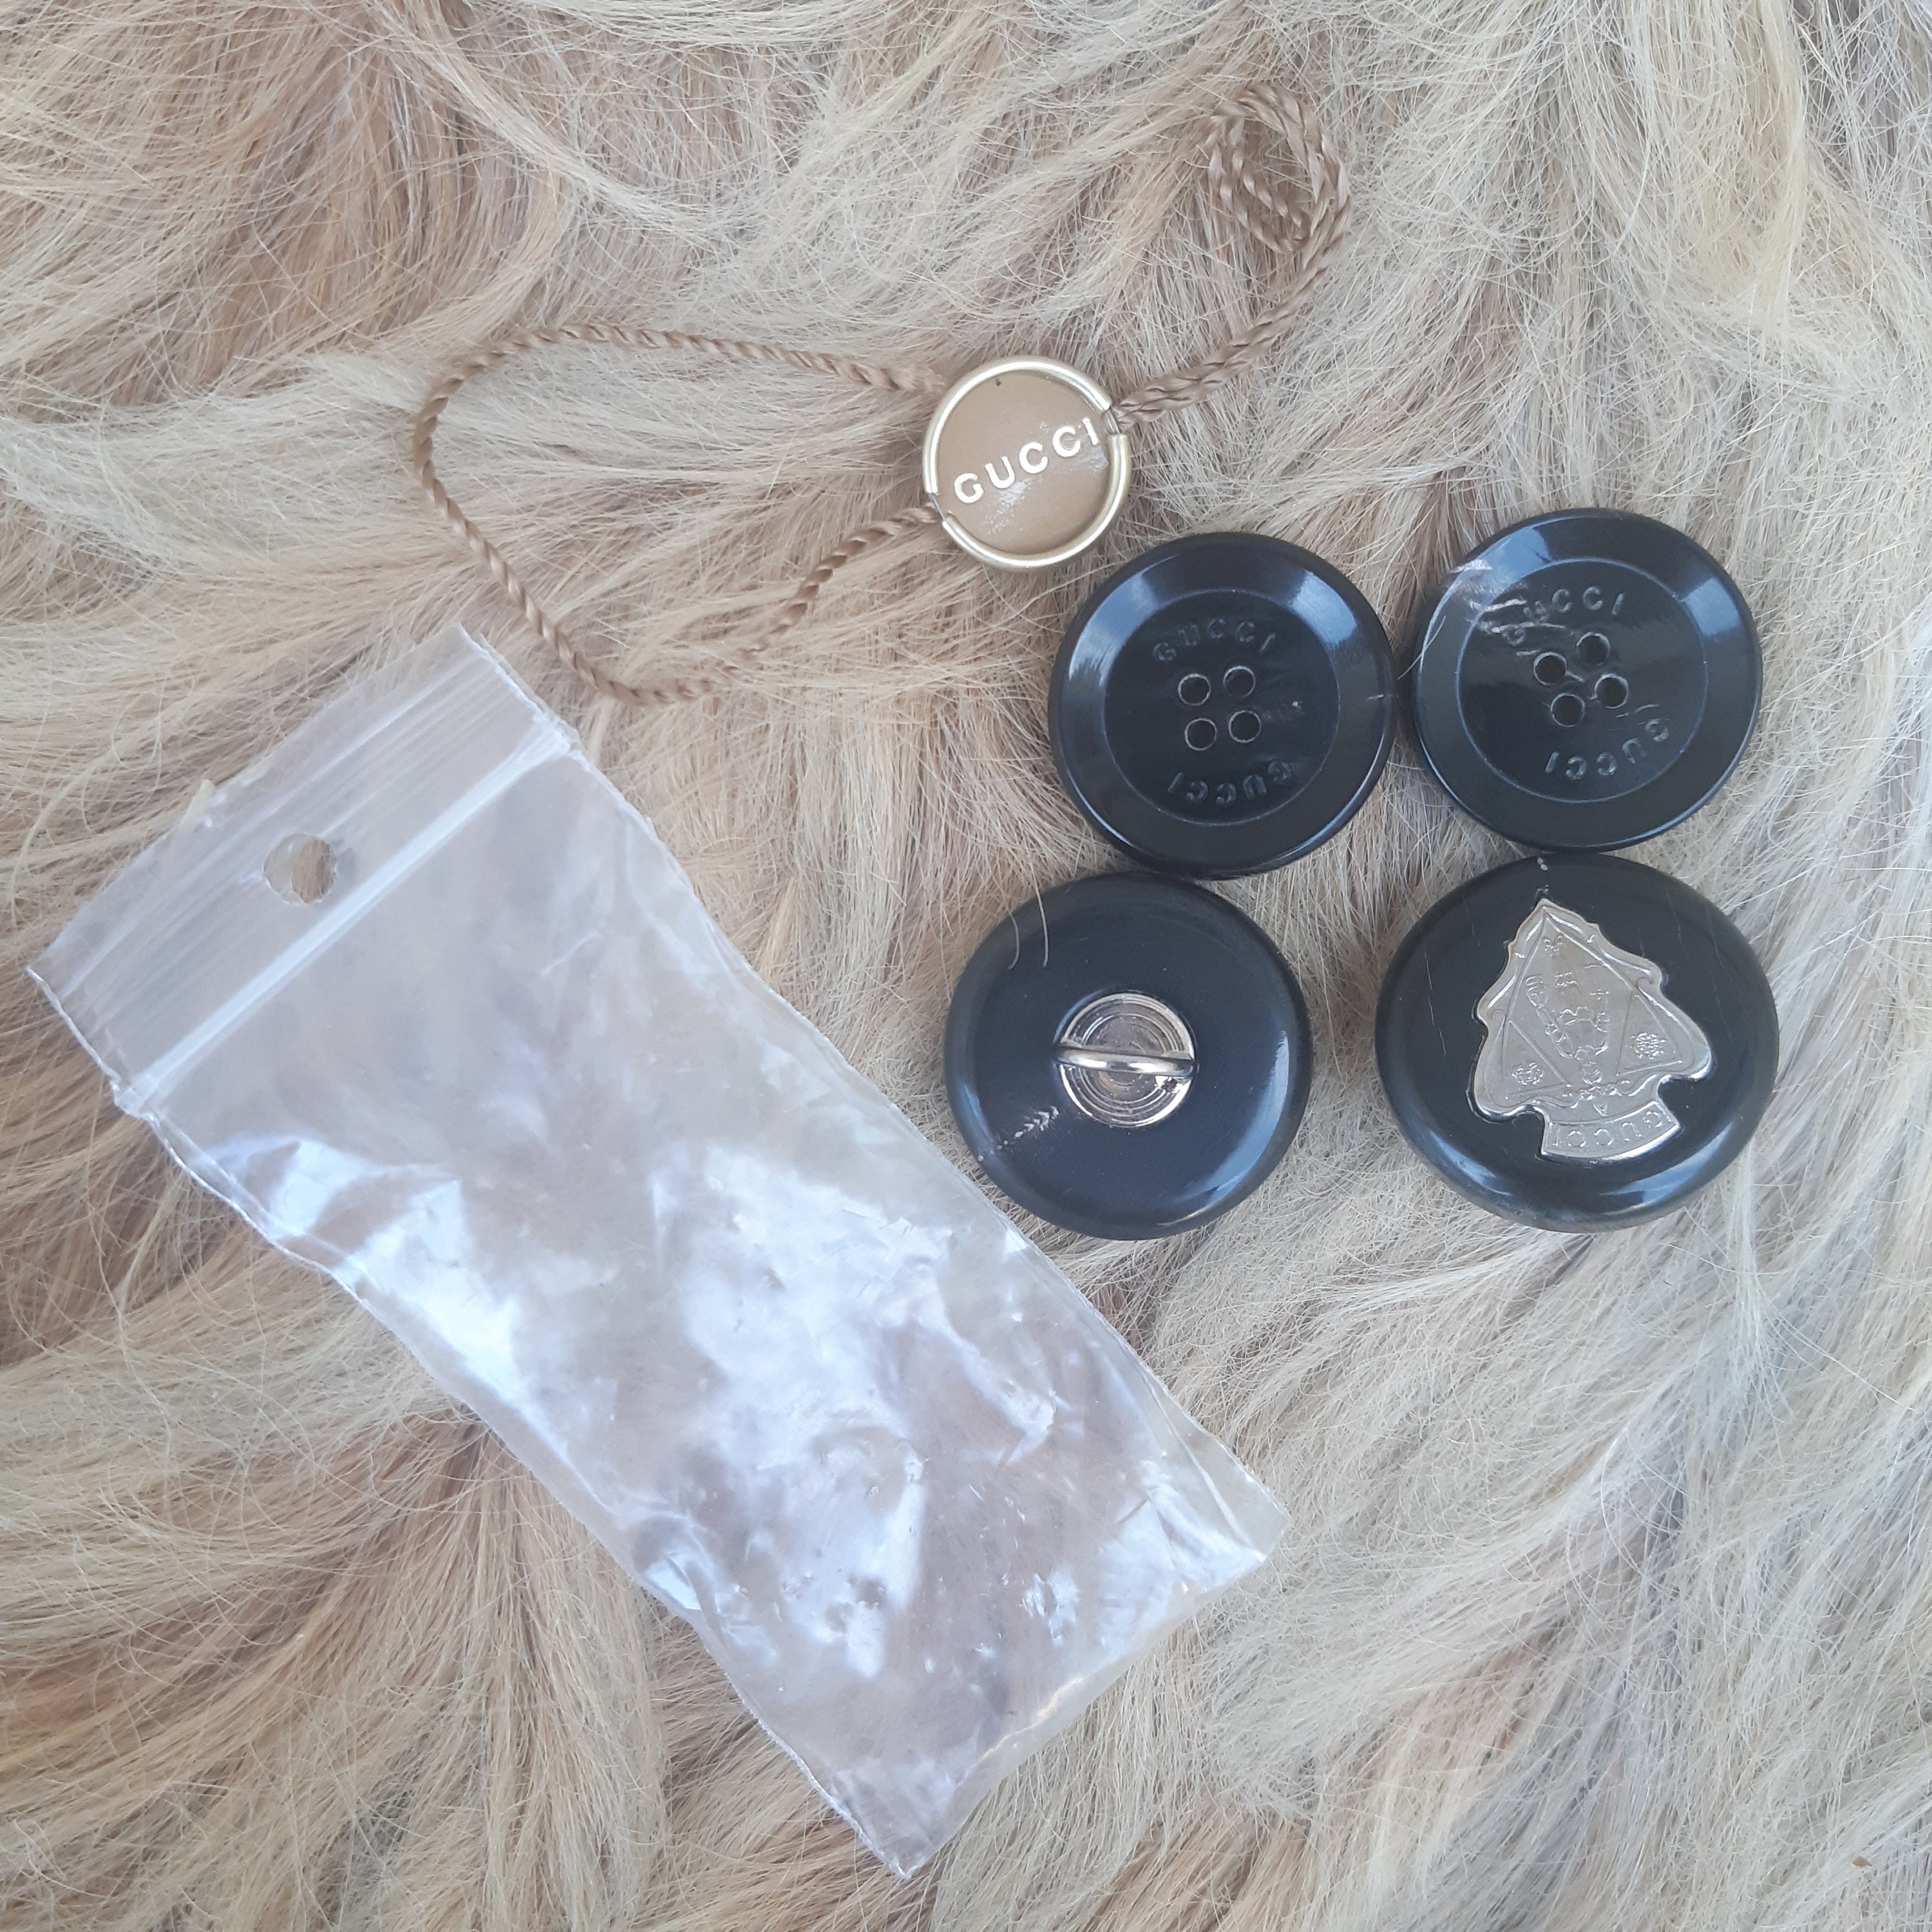 Gucci Replacement Buttons 1 Gold Color Metal Shank 1 Black 4 Hole